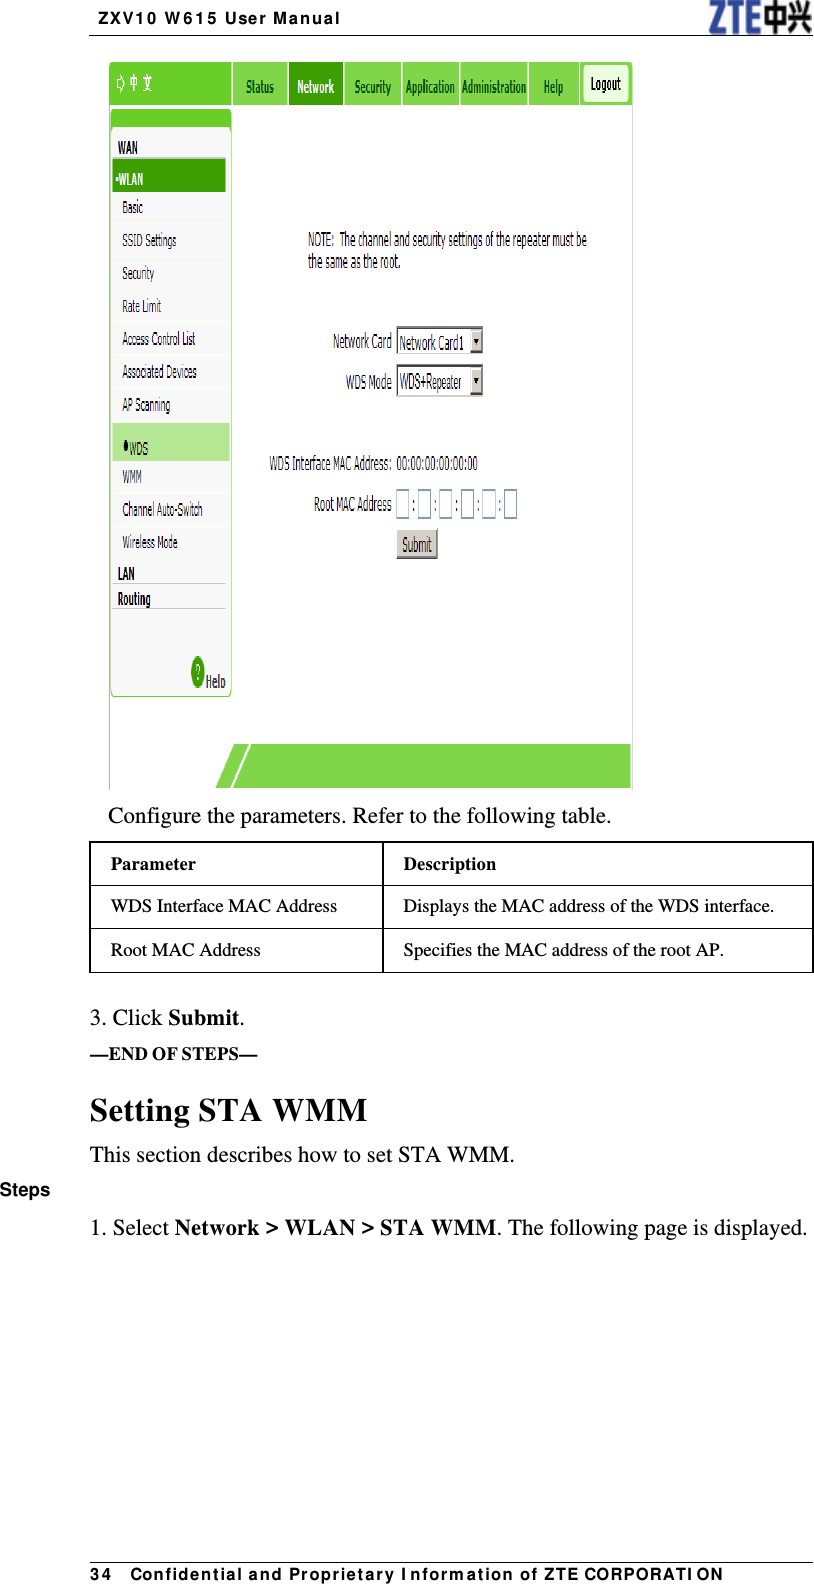   ZX V1 0  W 6 1 5  User Manua l 3 4   Con fidential and Pr opr ietary I nform a t ion of ZTE CORPORATI ON Configure the parameters. Refer to the following table. Parameter Description WDS Interface MAC Address  Displays the MAC address of the WDS interface. Root MAC Address  Specifies the MAC address of the root AP.   3. Click Submit. —END OF STEPS— Setting STA WMM This section describes how to set STA WMM. Steps 1. Select Network &gt; WLAN &gt; STA WMM. The following page is displayed. 